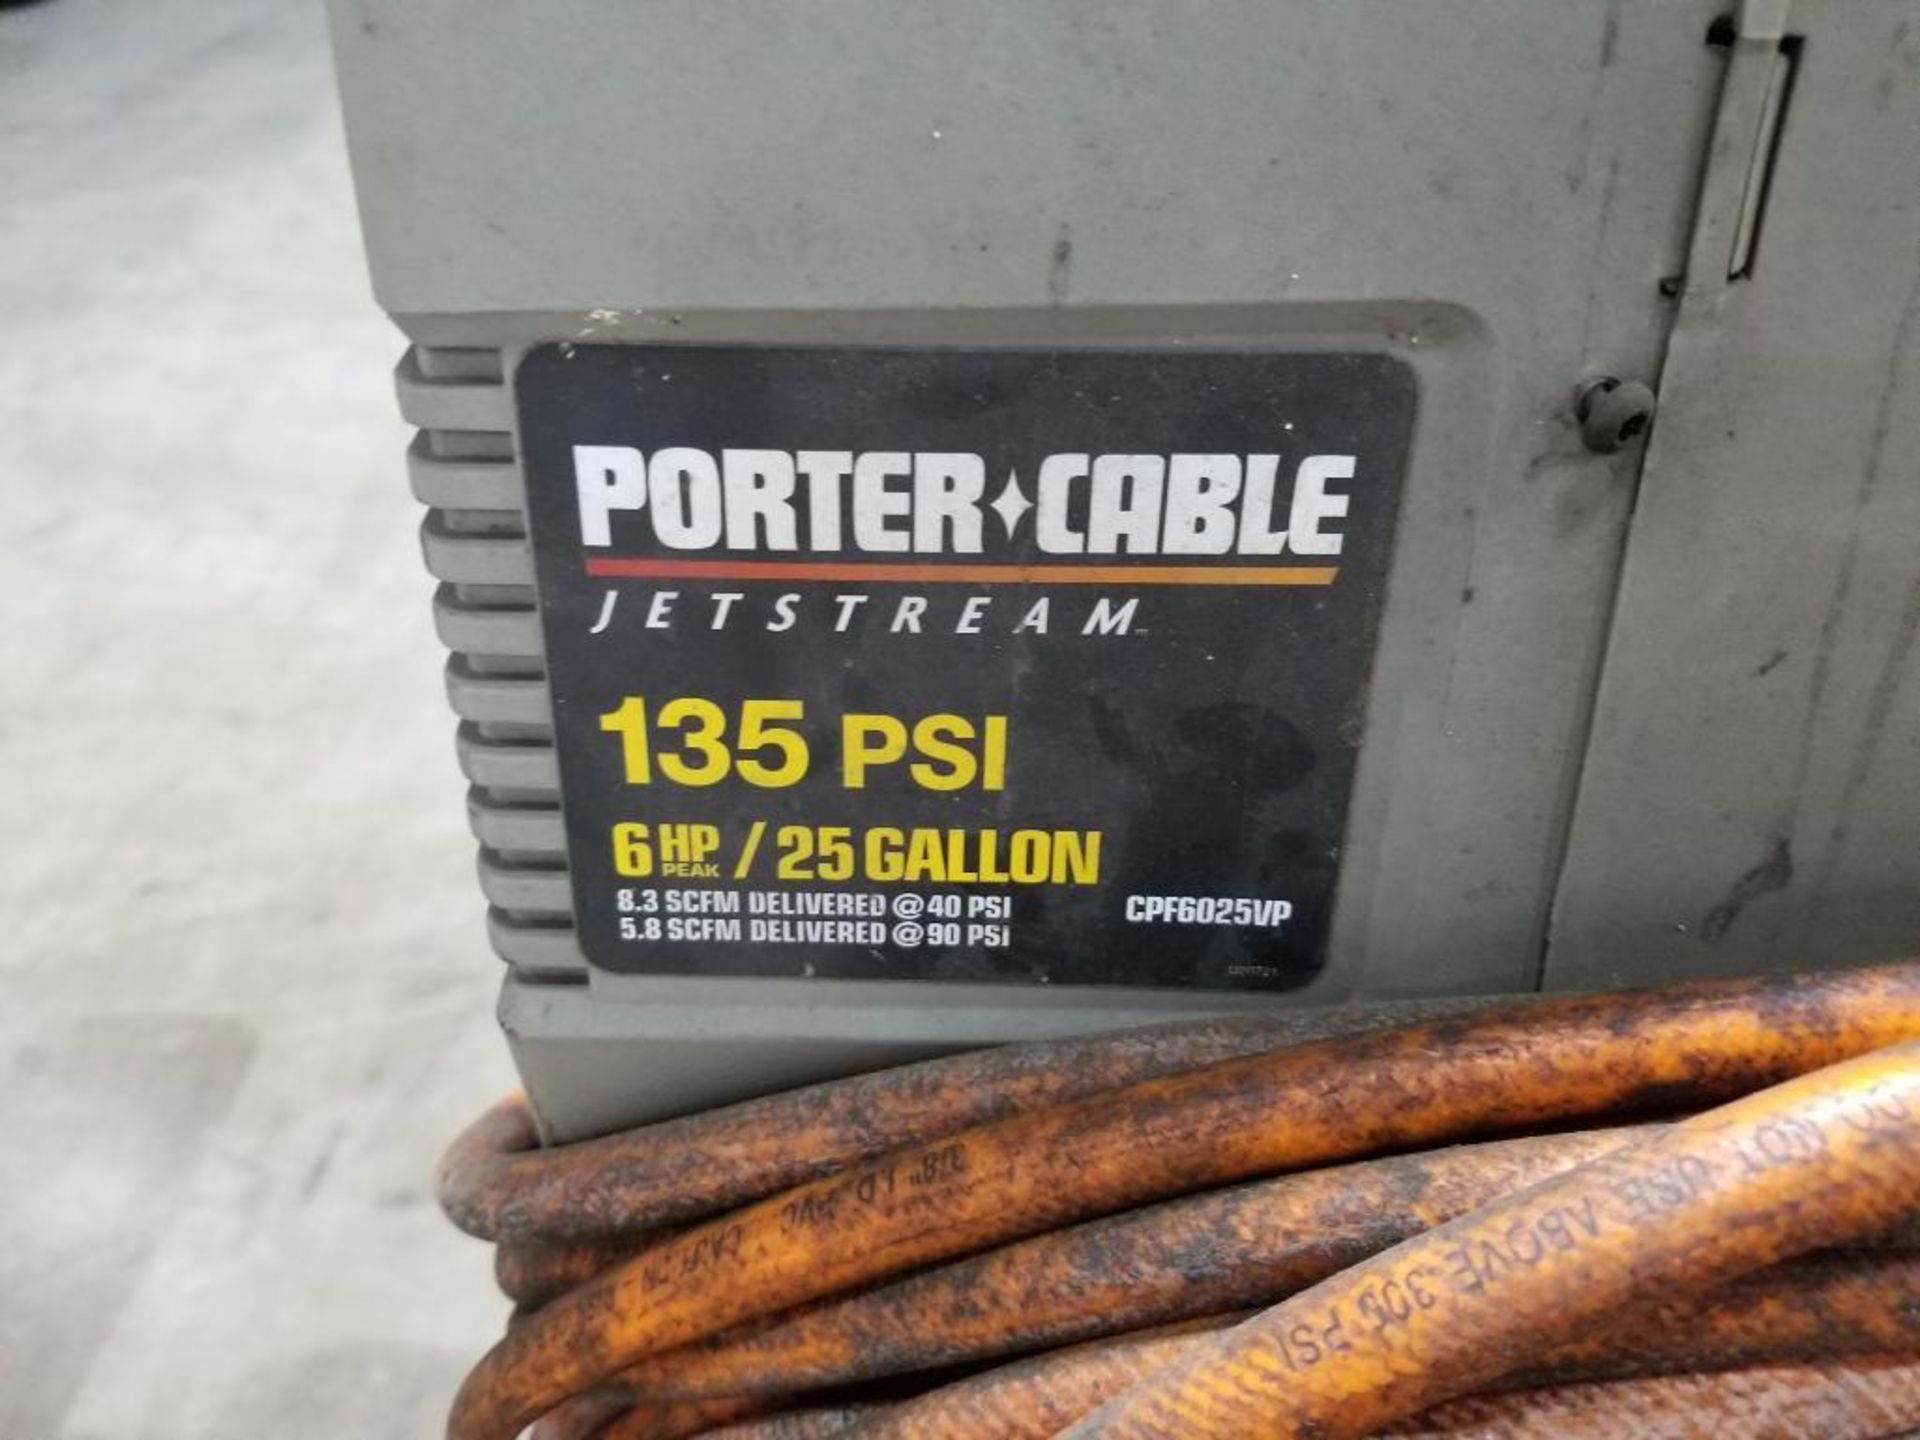 Porter Cable Jetstream 135PSI, 6HP, 25Gal. compressor. - Image 2 of 6